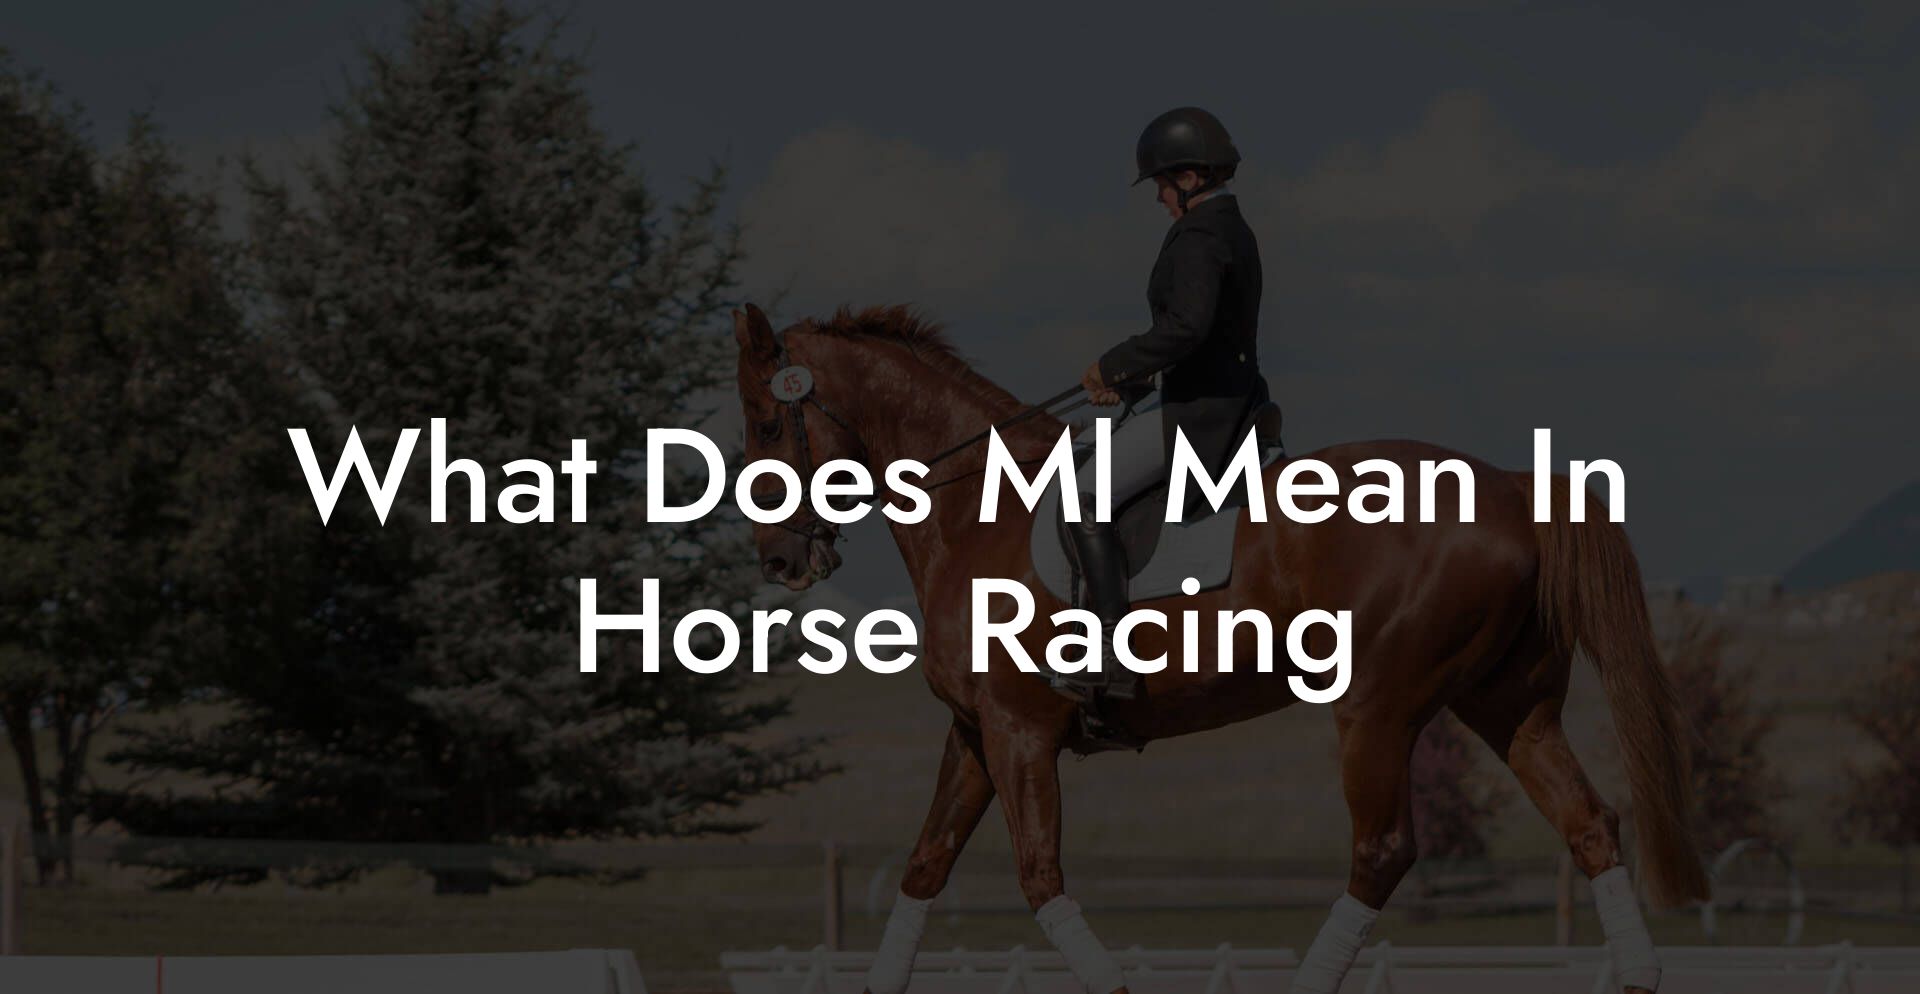 What Does Ml Mean In Horse Racing